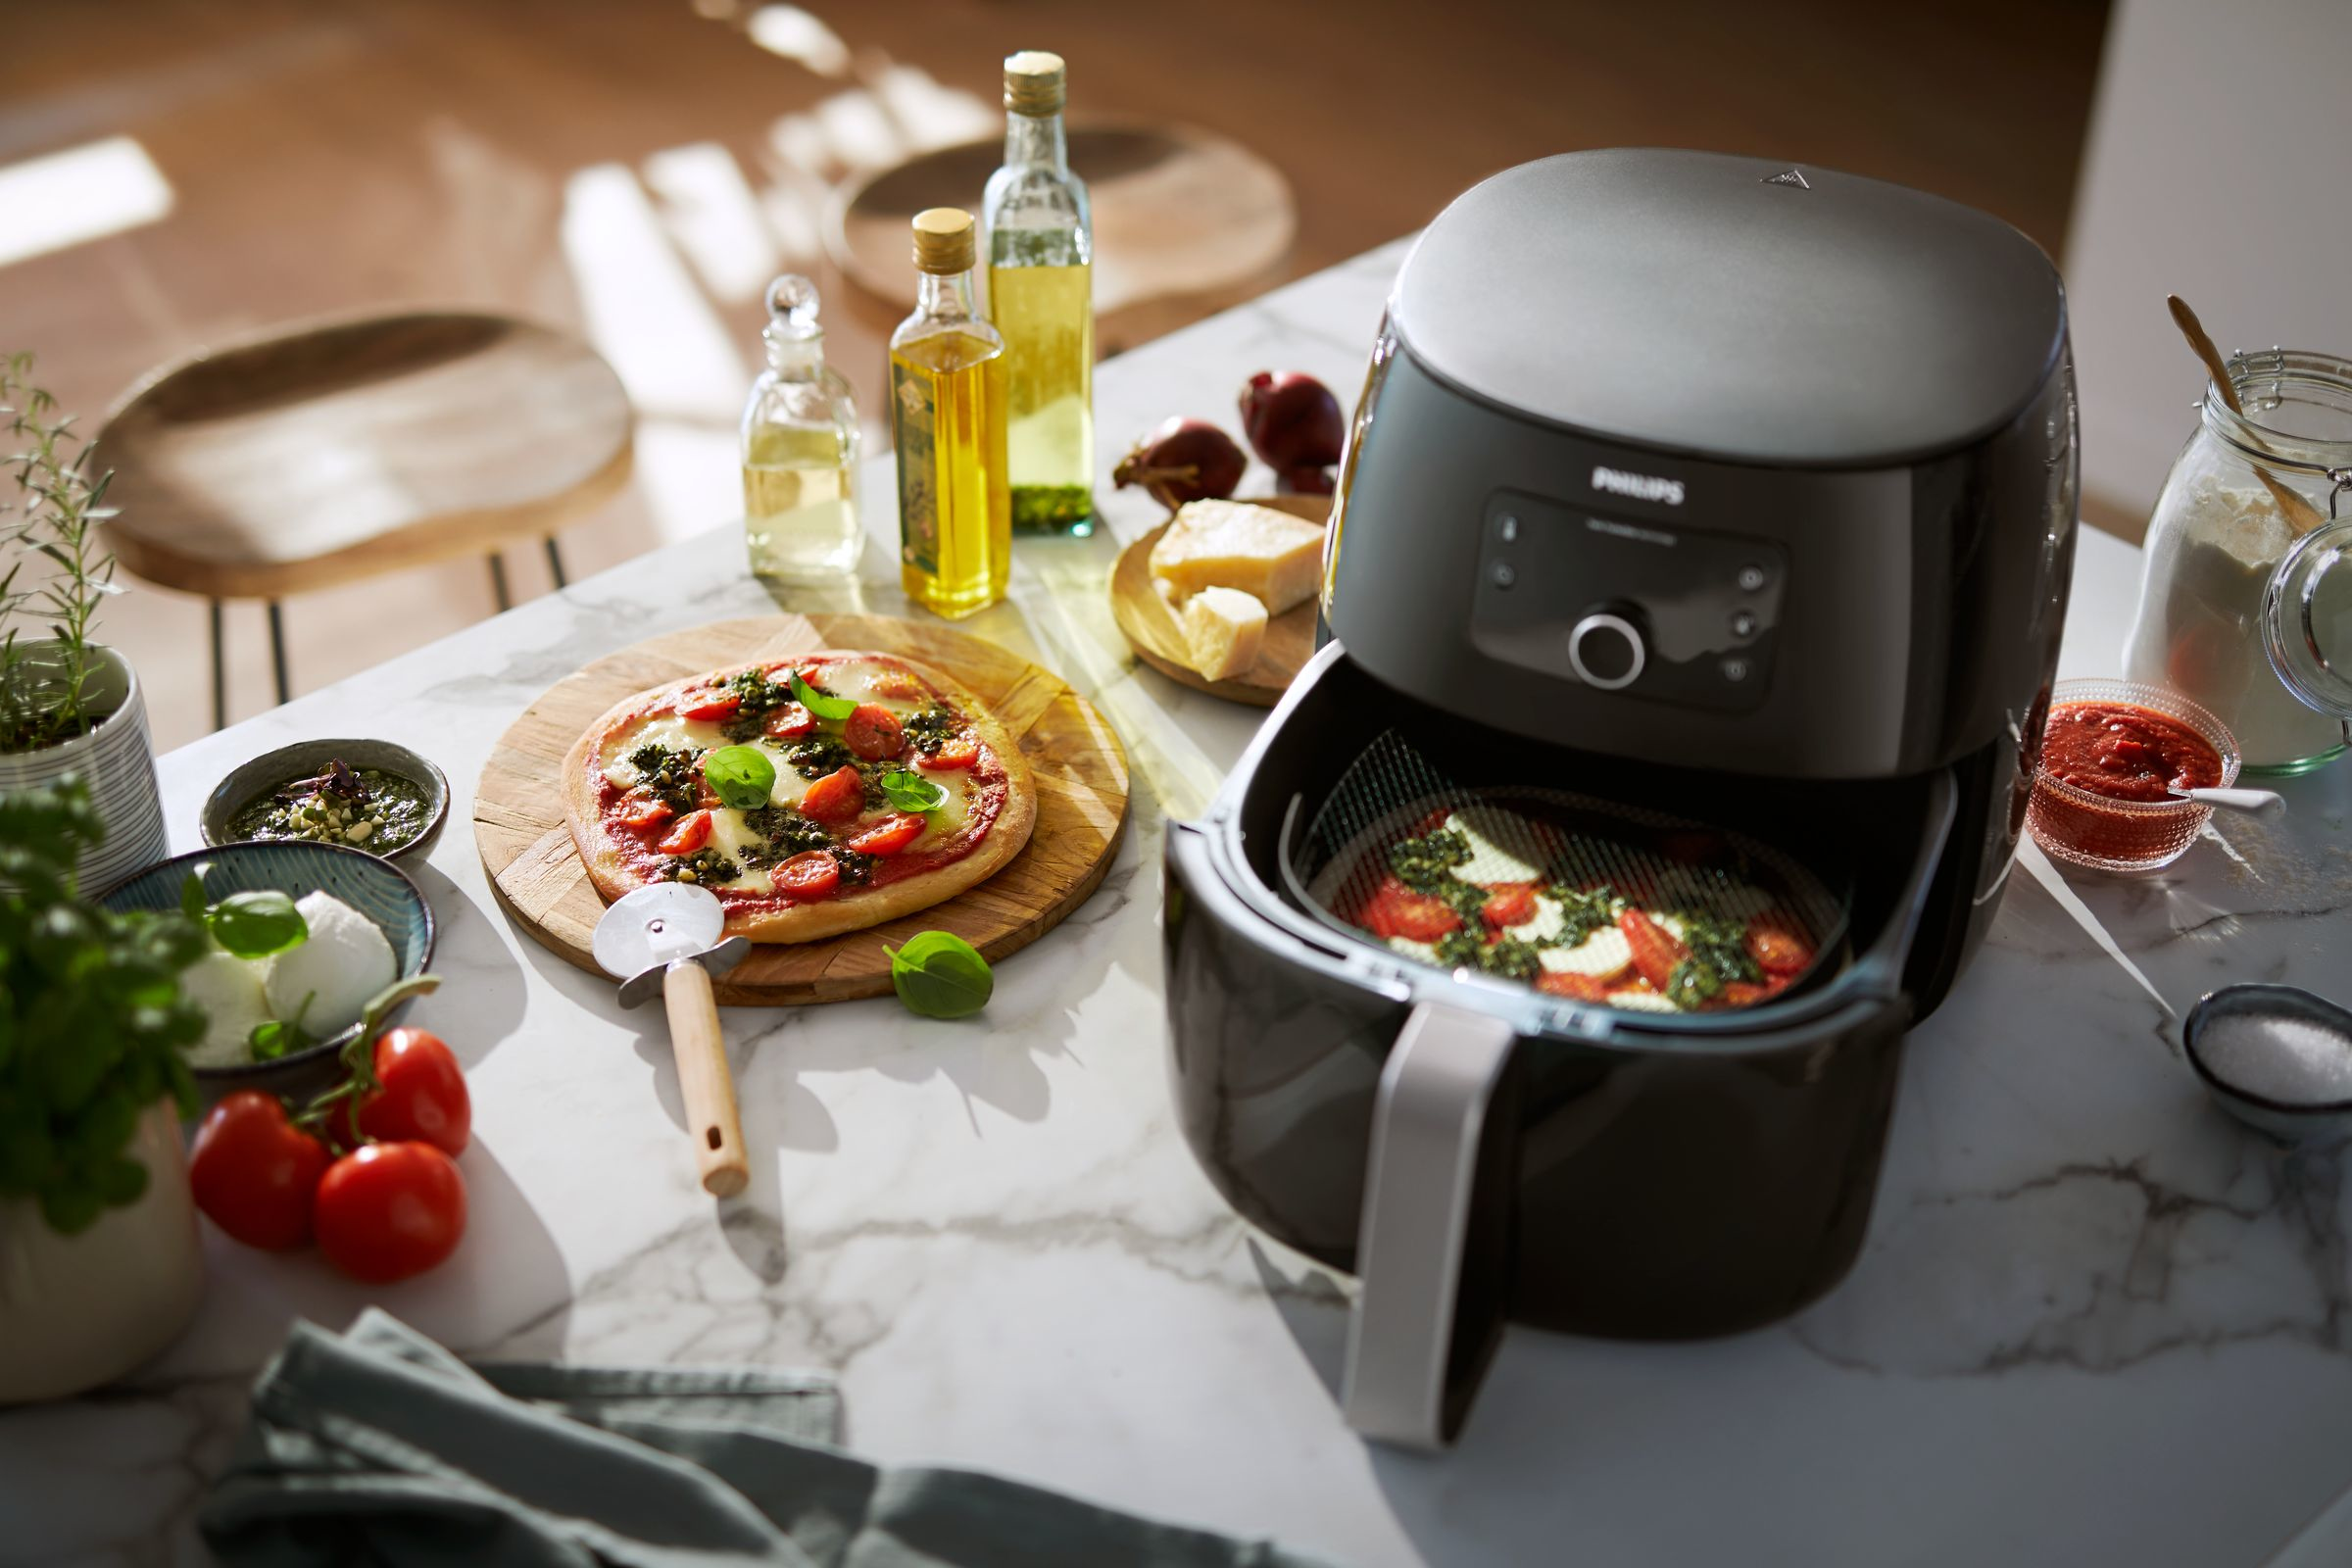 Philips AirFryer Accessory Bundle